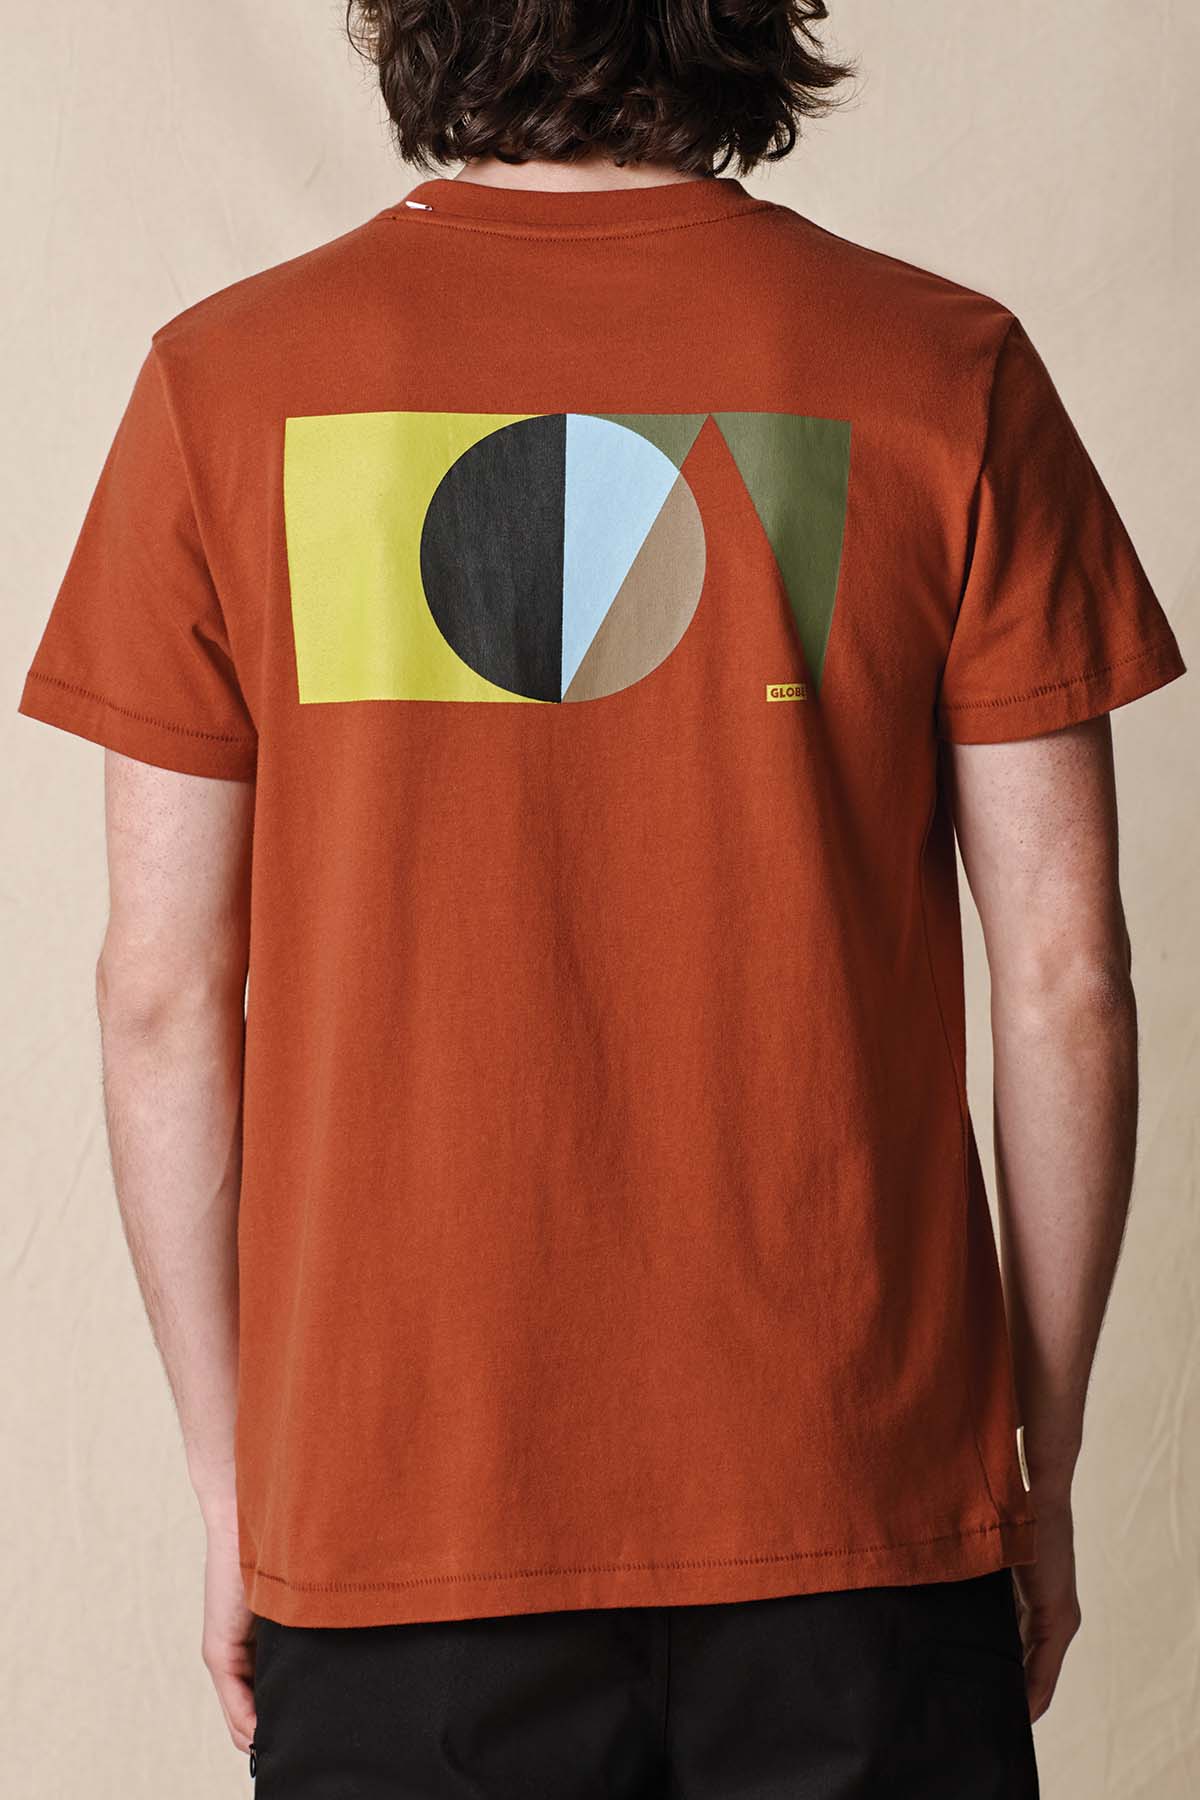 back view of flag tee